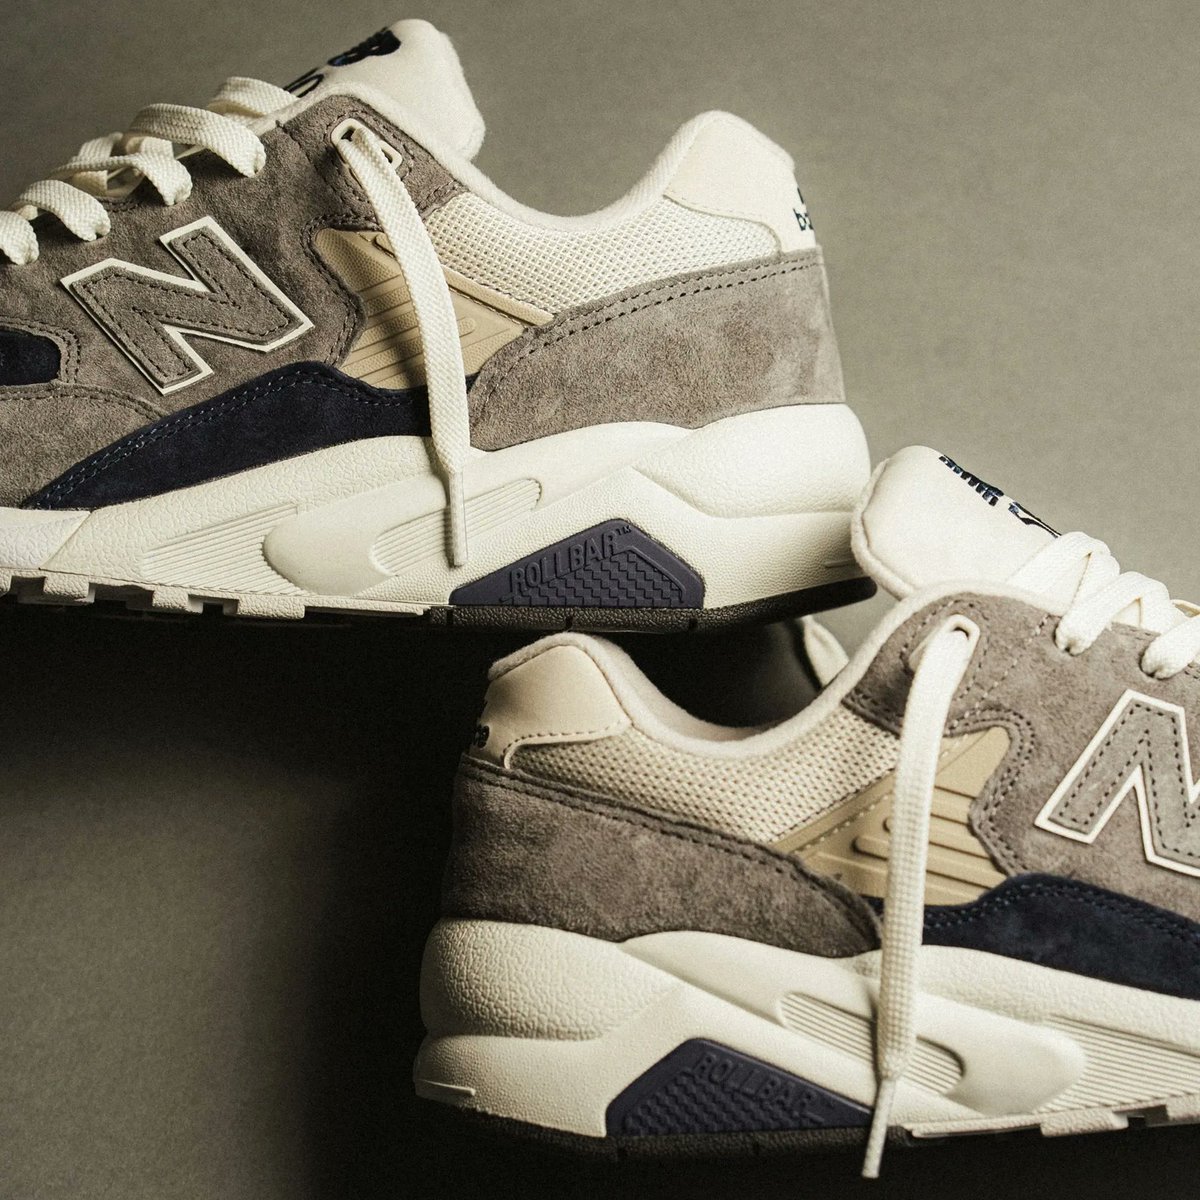 30% OFF + free shipping on the New Balance 580 'Castlerock' 

BUY HERE: bit.ly/3X3RiDf